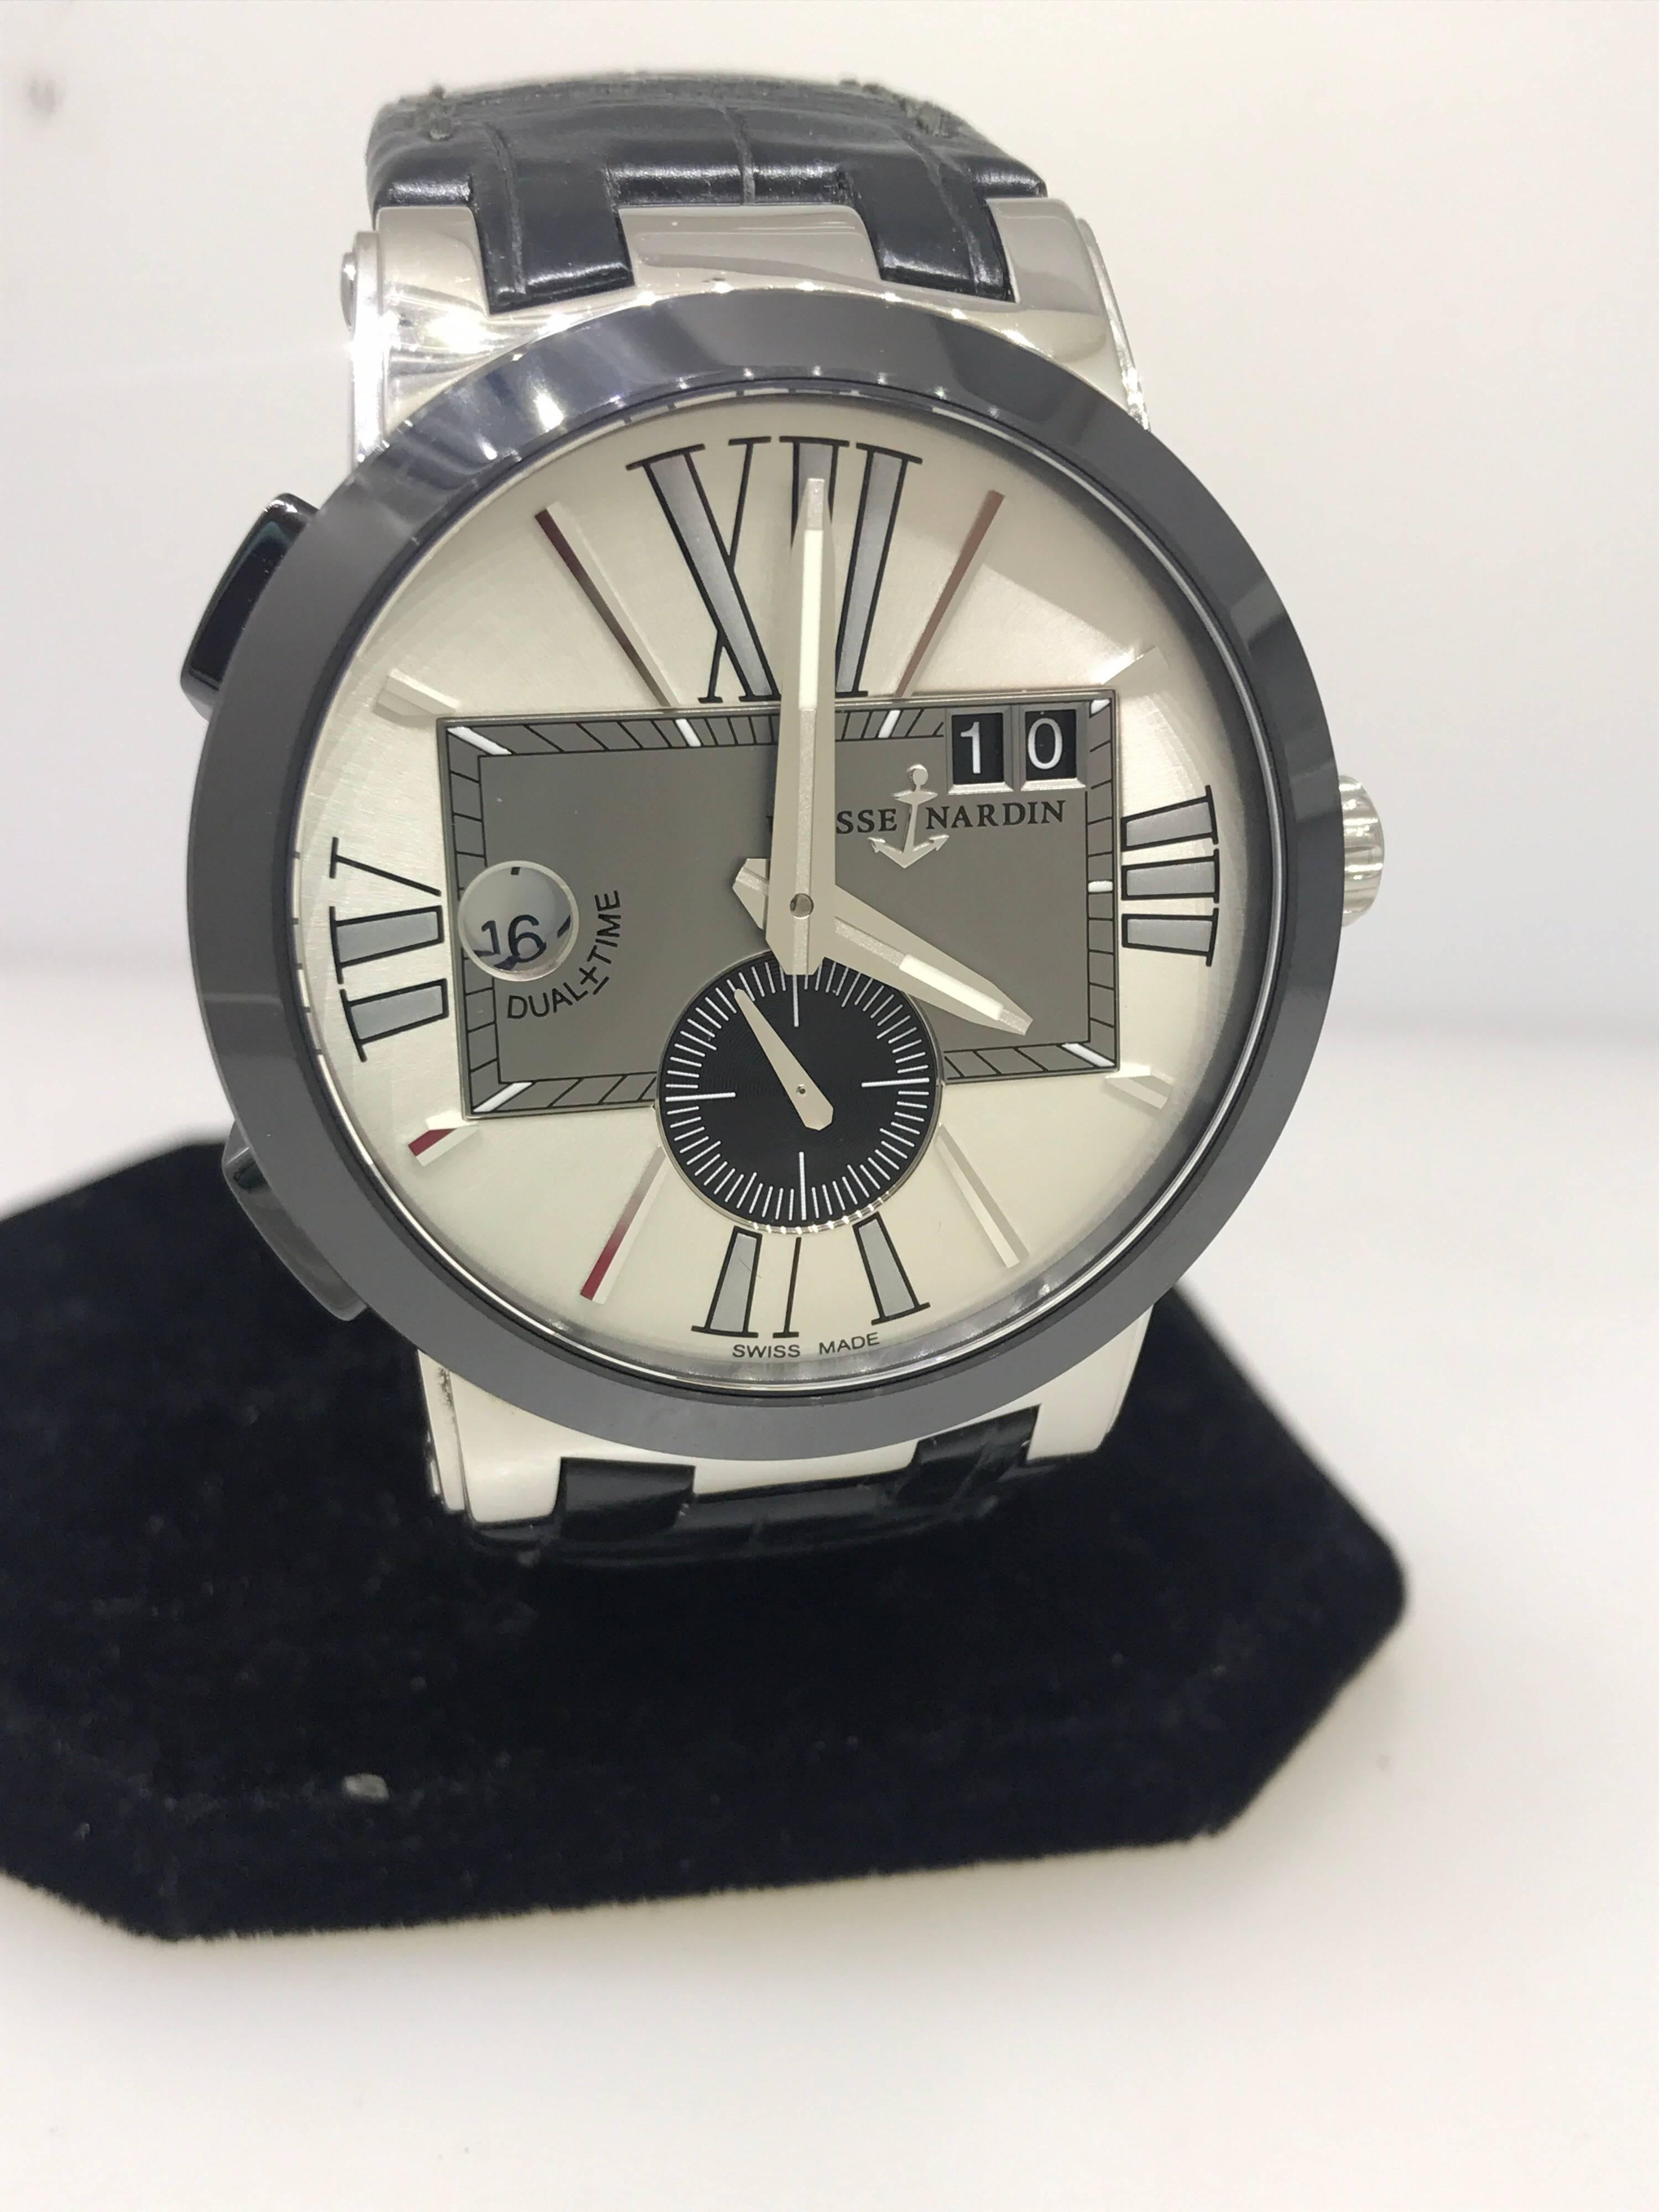 Ulysse Nardin Executive Dual Time Silver Dial Automatic Men's Watch 243-00/421 In New Condition For Sale In New York, NY